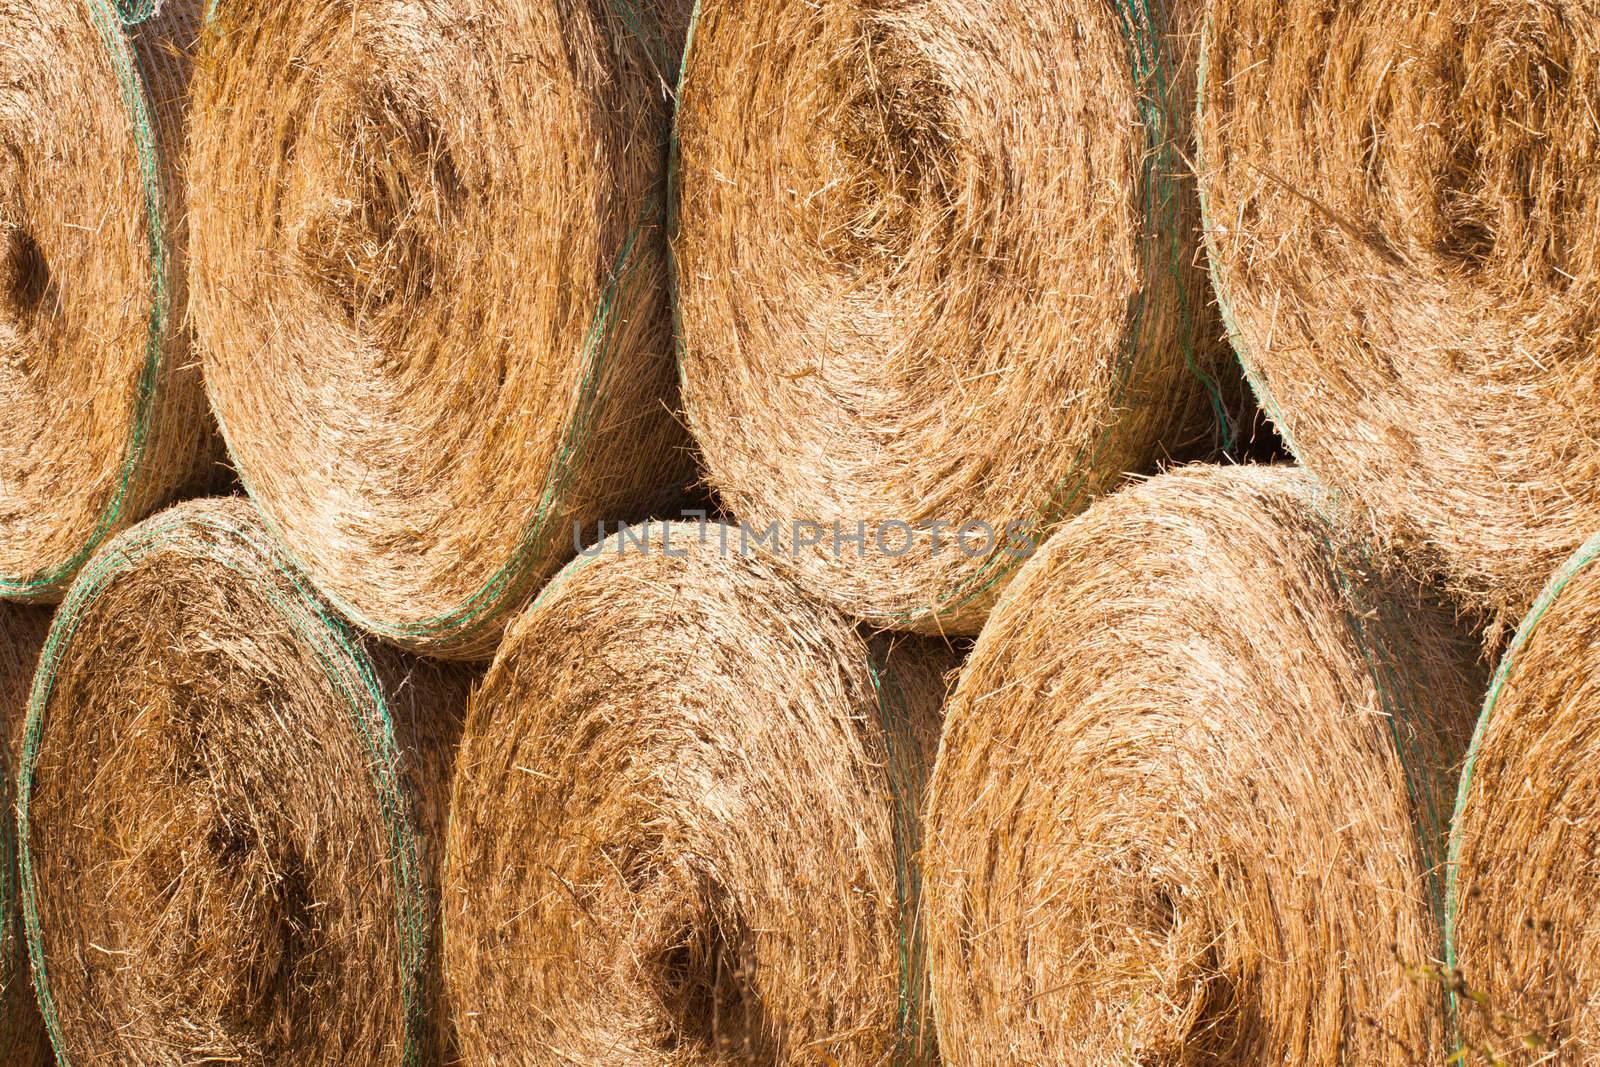 Stack of round haybales drying outdoors